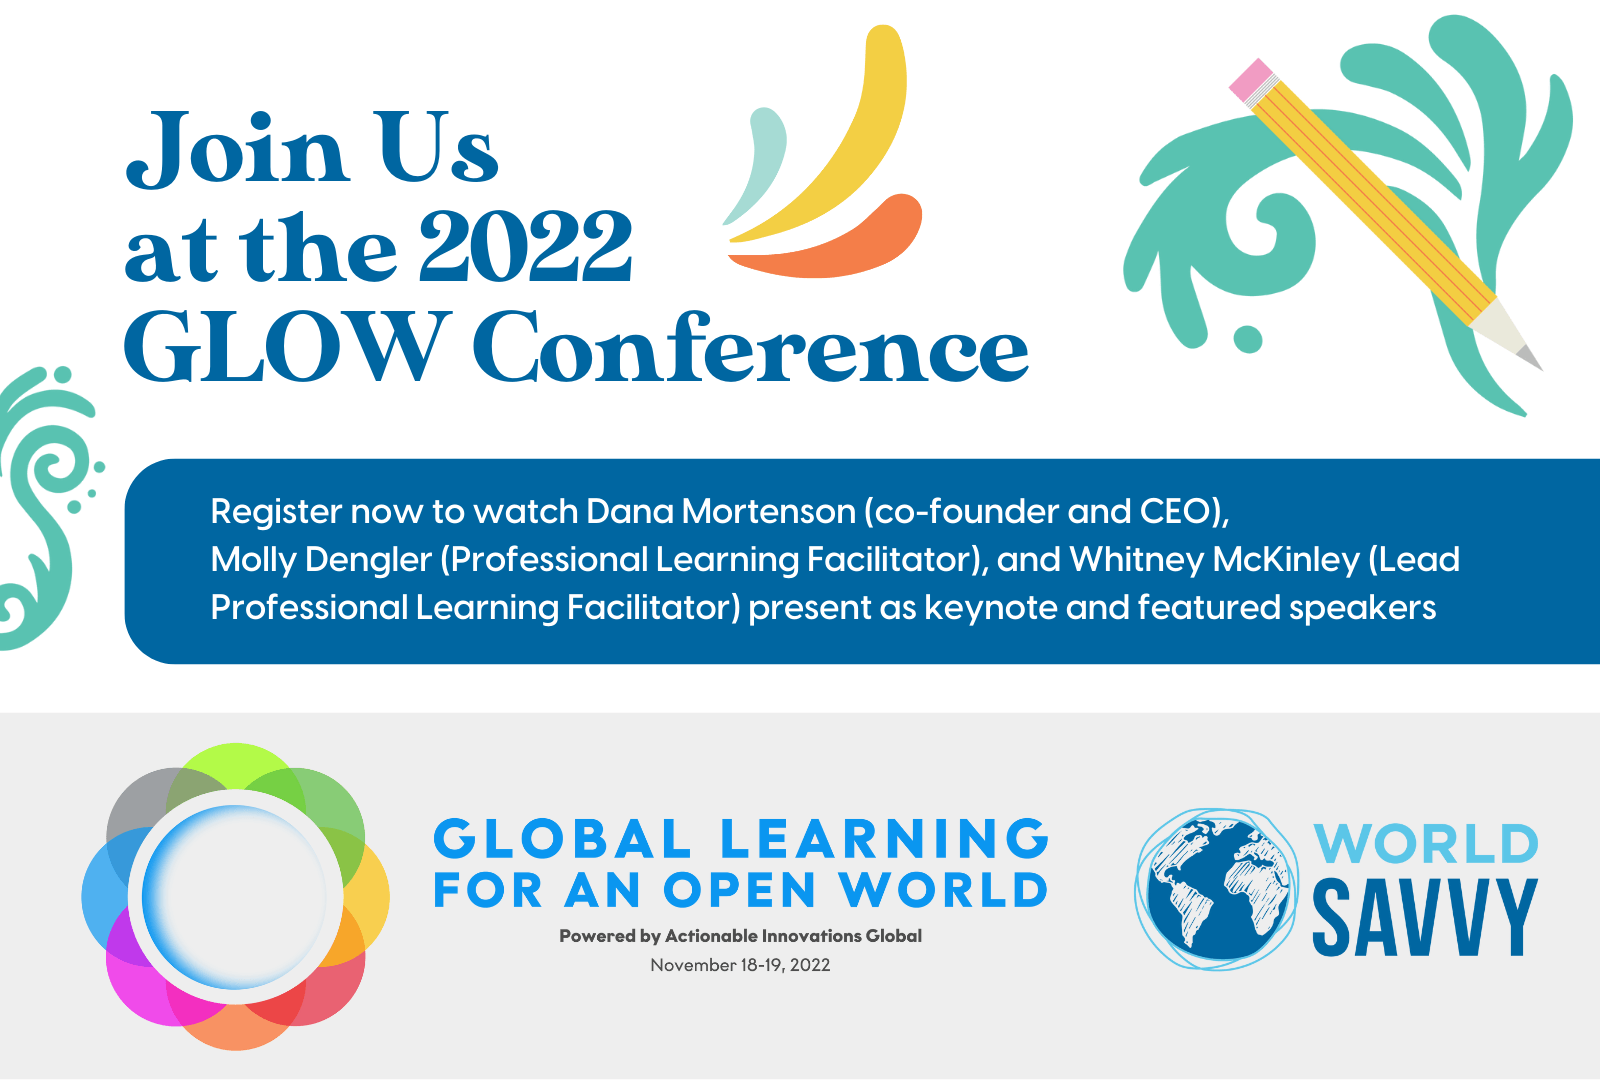 Global Learning for an Open World Digital Conference image